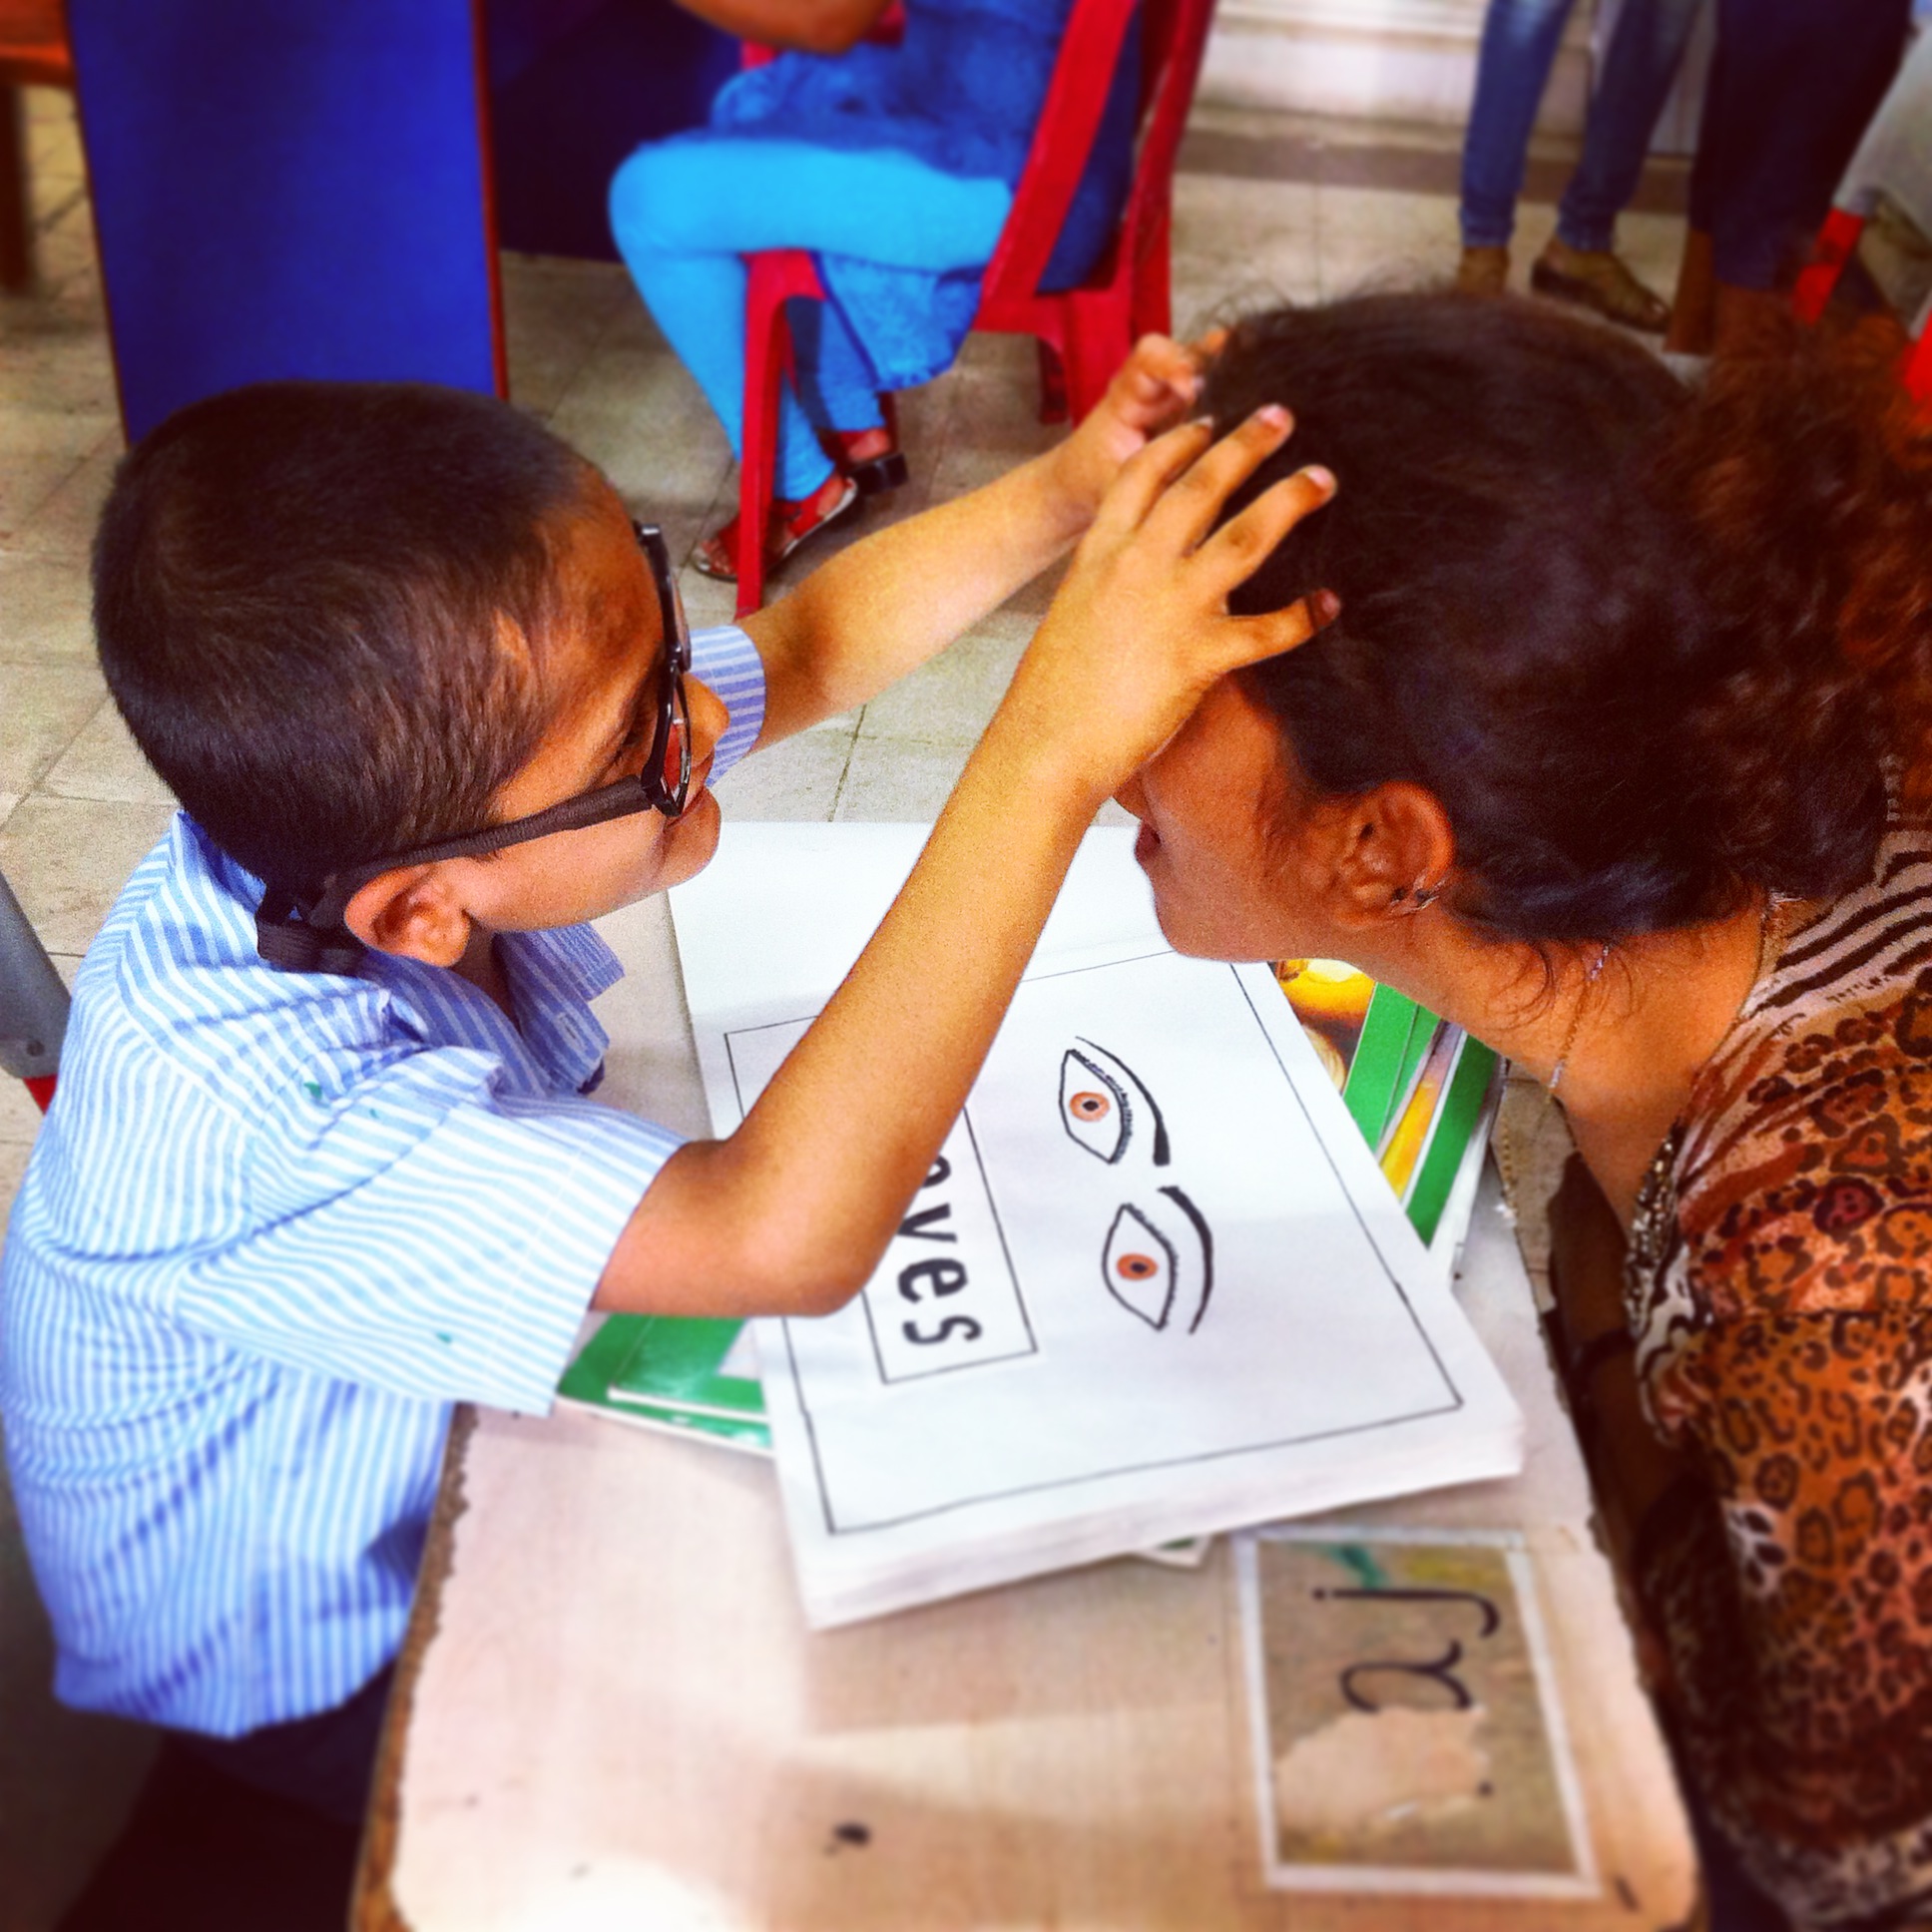 Teacher Speak: Could Your Child Have A Disability? | Leher NGO in India | Child Rights Organization